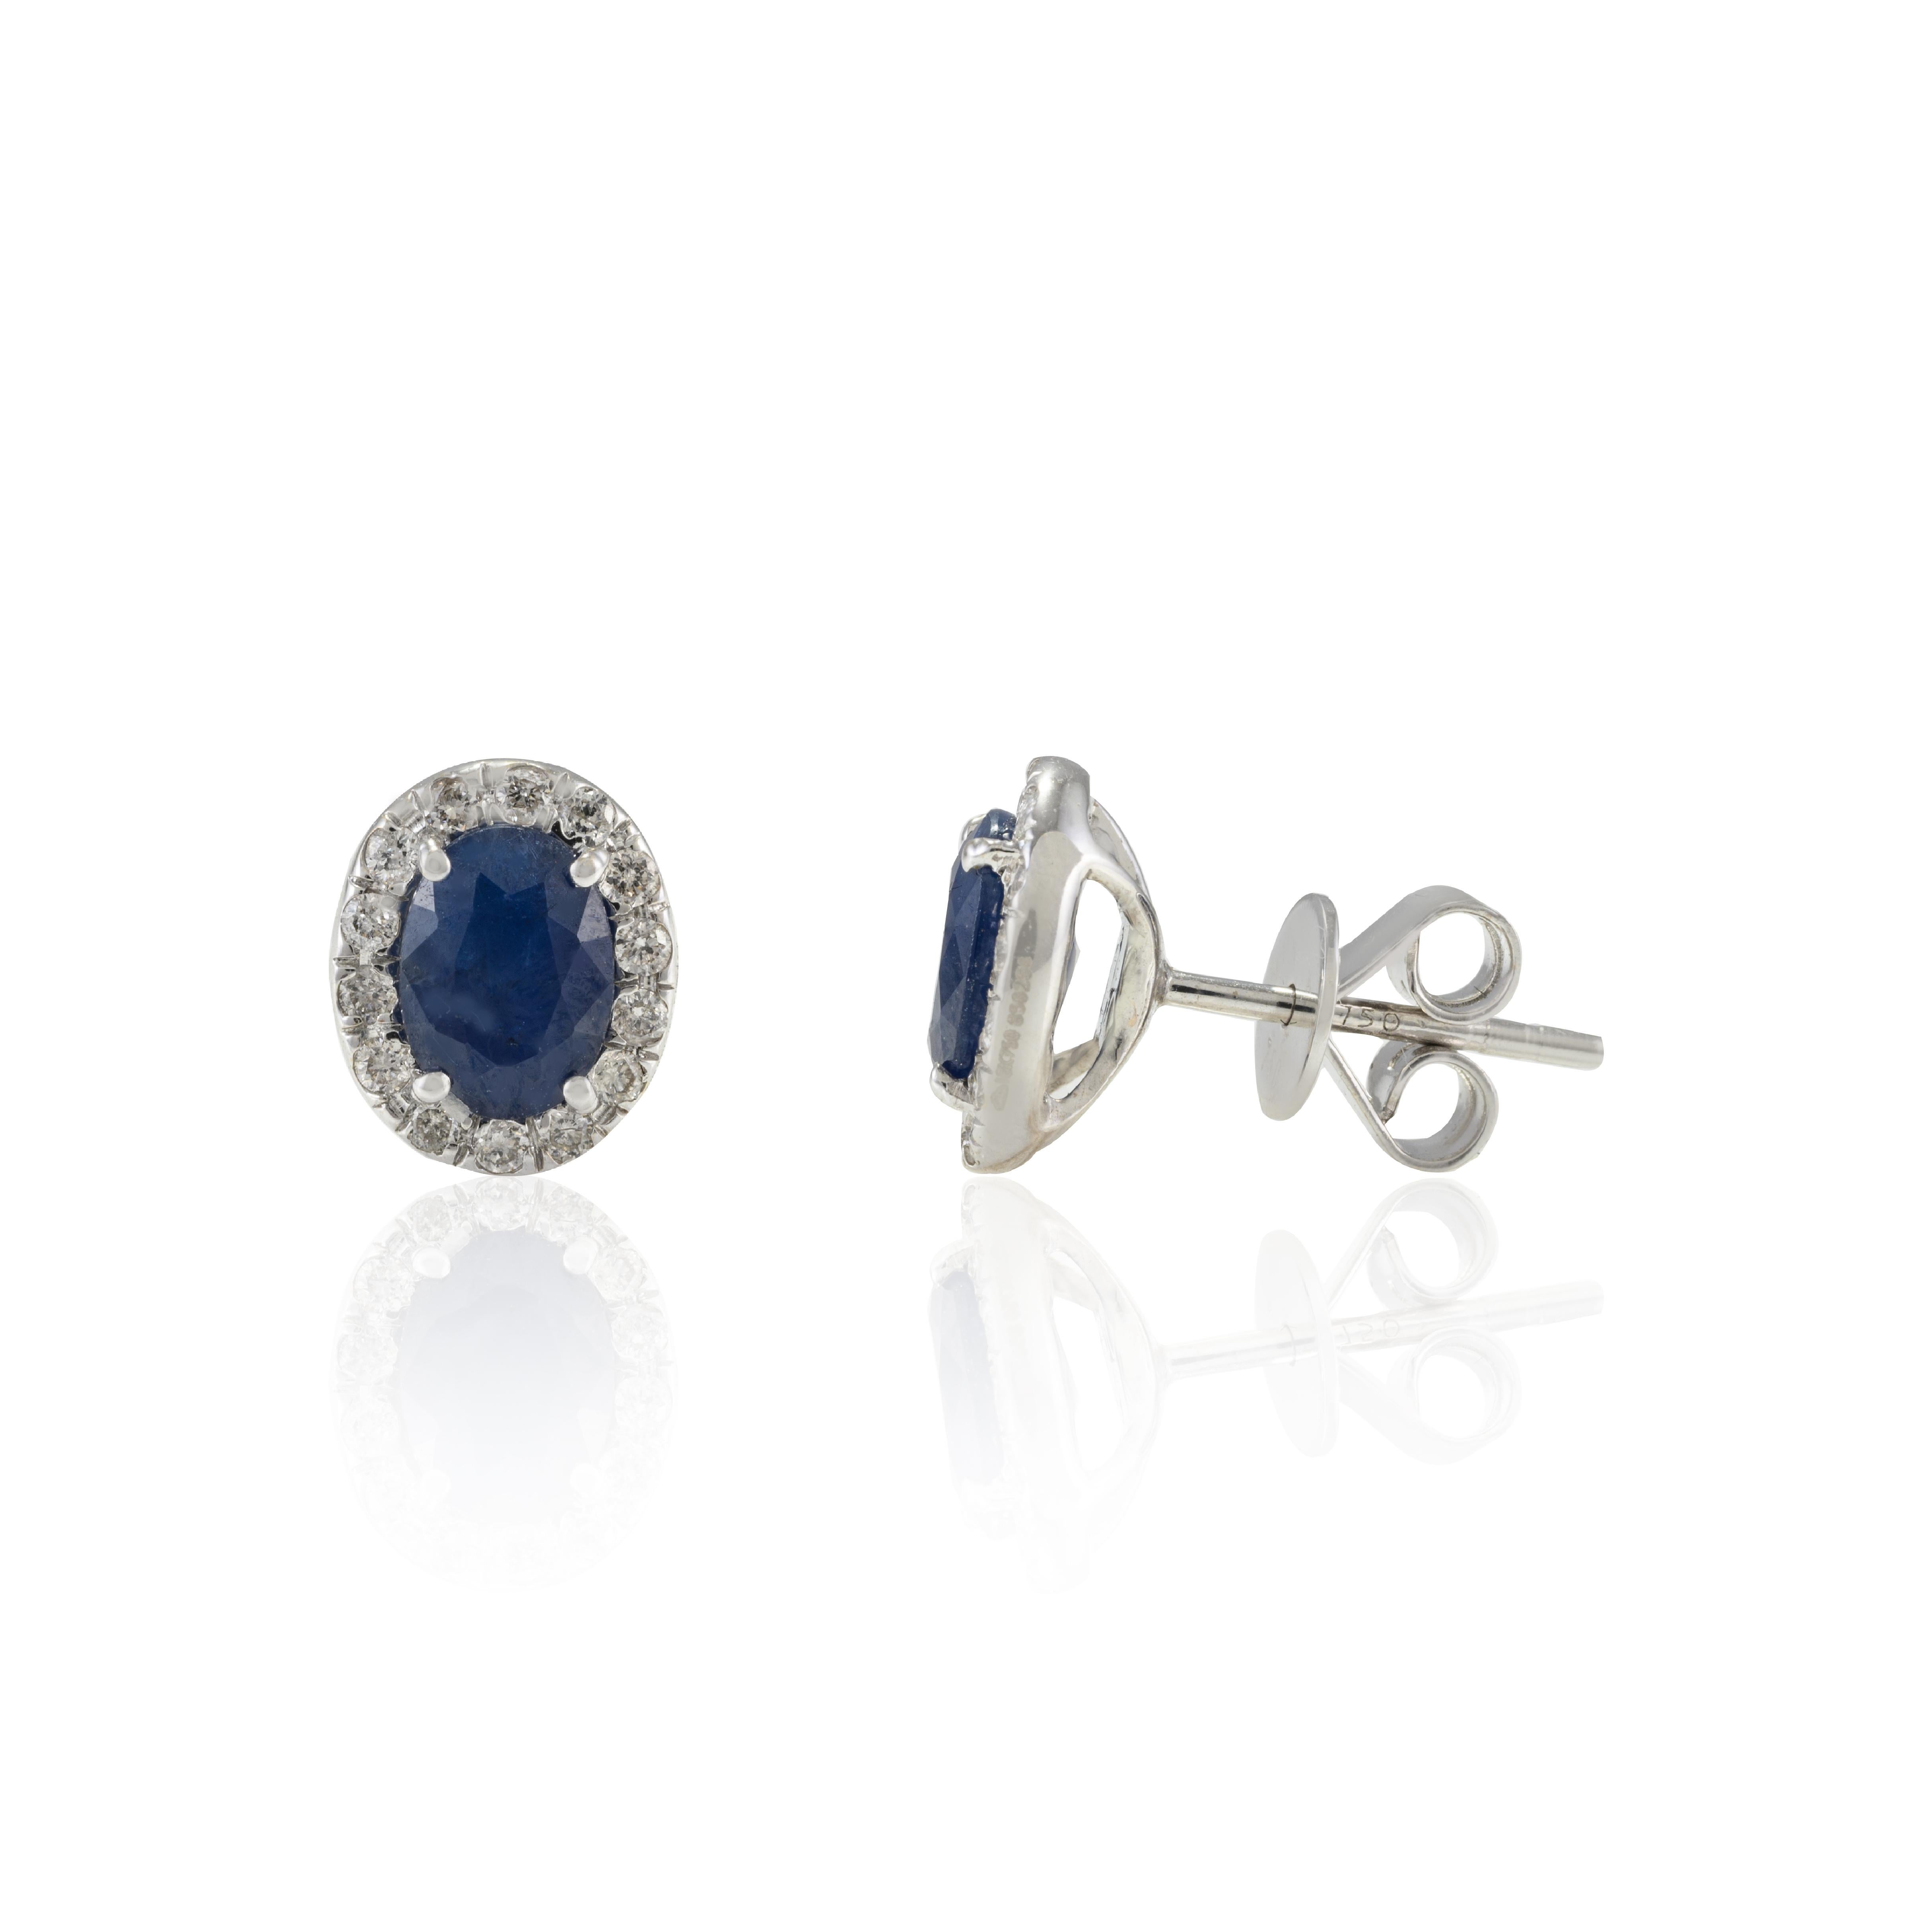 Deep Blue Sapphire and Halo Diamond Stud Earrings in 18K Gold to make a statement with your look. You shall need stud earrings to make a statement with your look. These earrings create a sparkling, luxurious look featuring oval cut